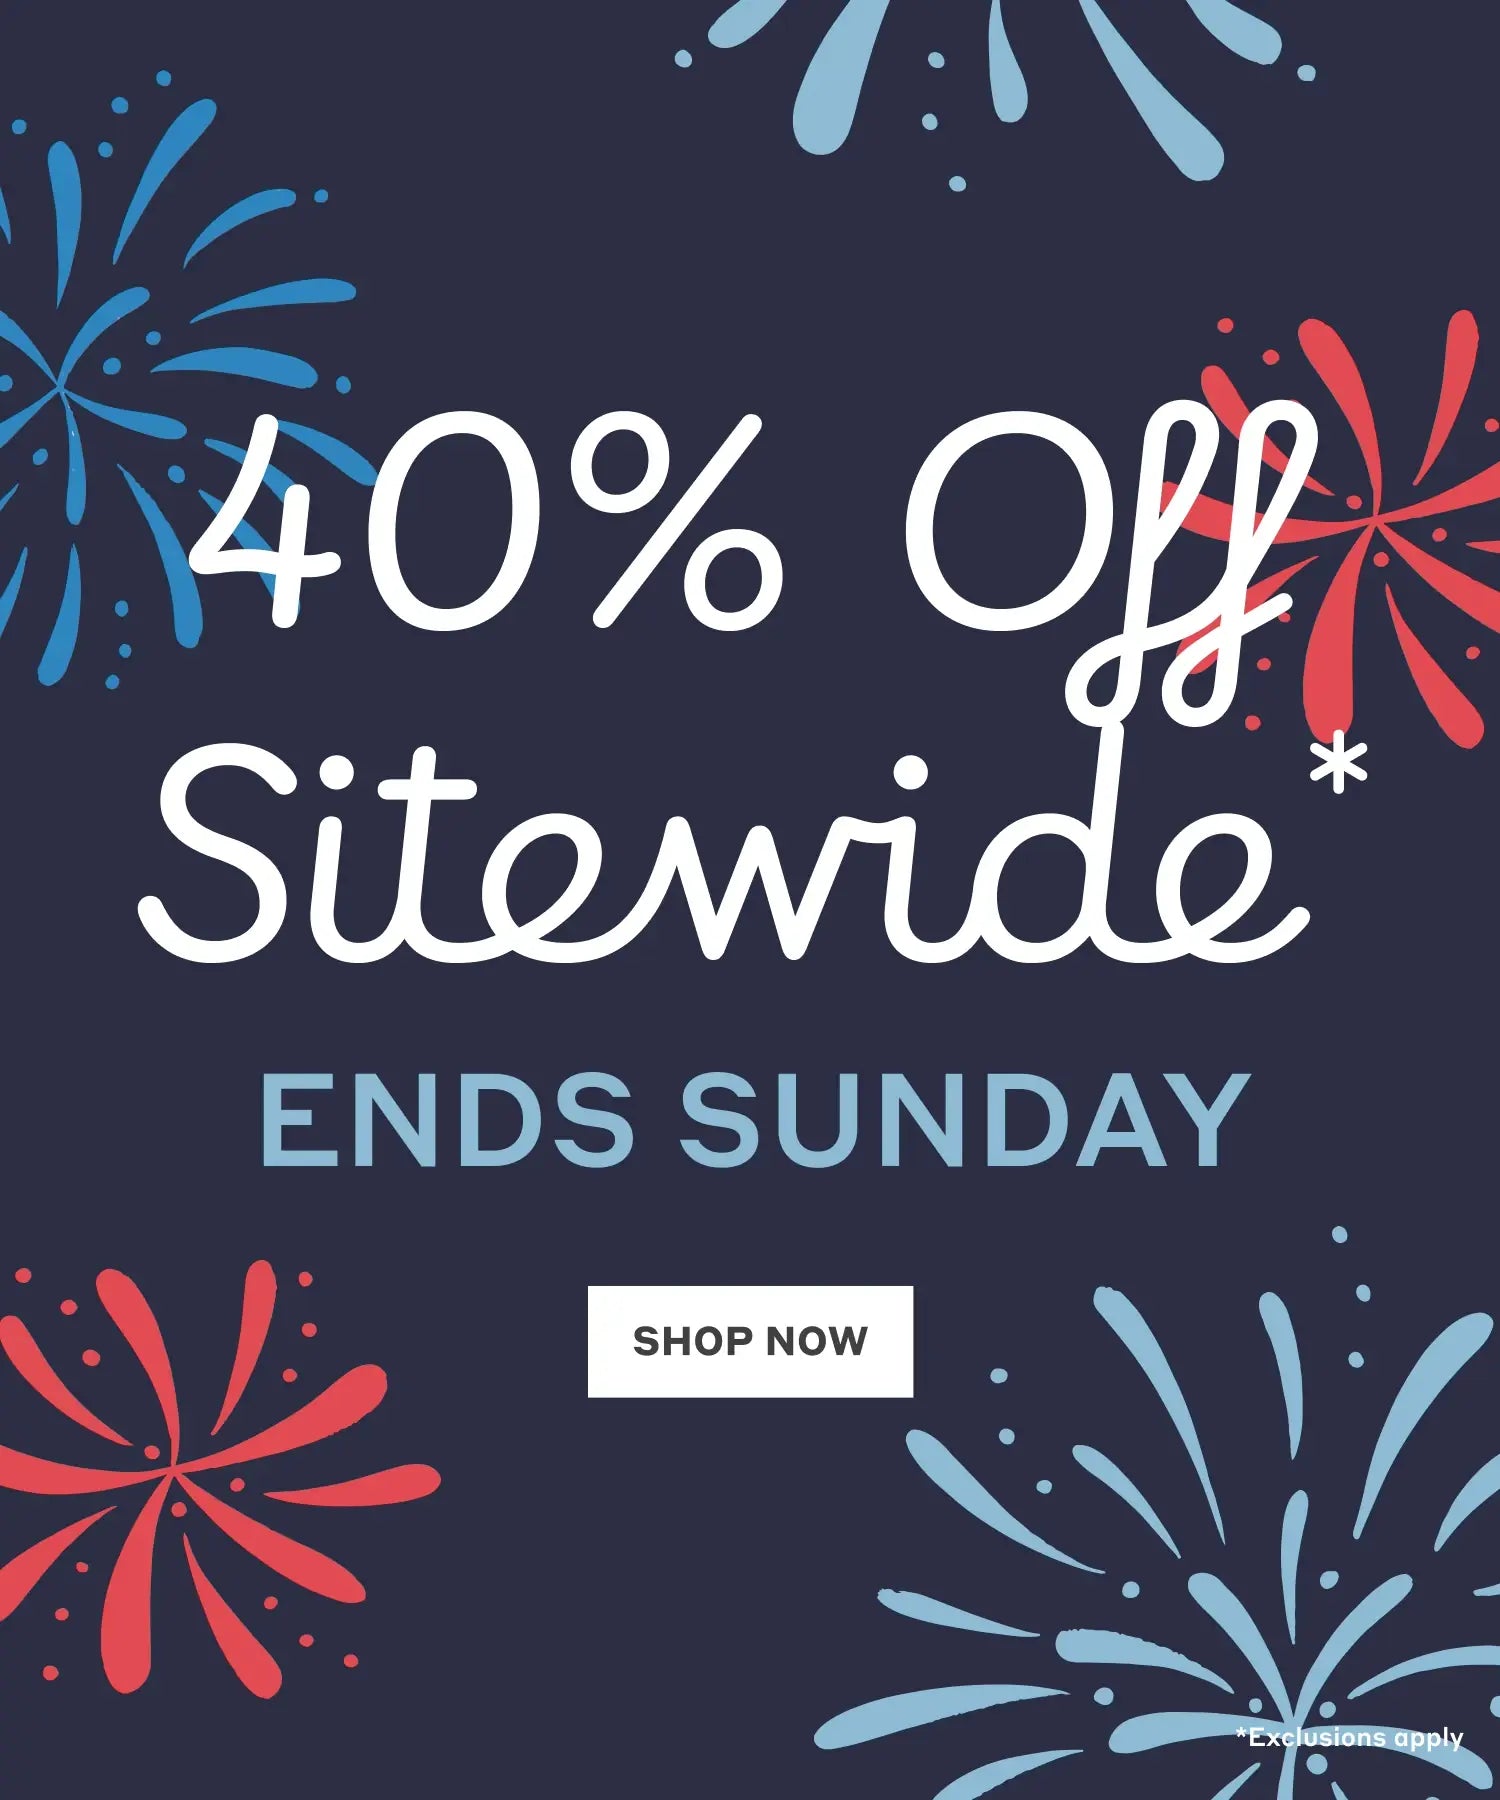 Hero banner with graphic fireworks and text: Memorial Day Sale - 40% Off Sitewide. Ends Sunday - Shop Now